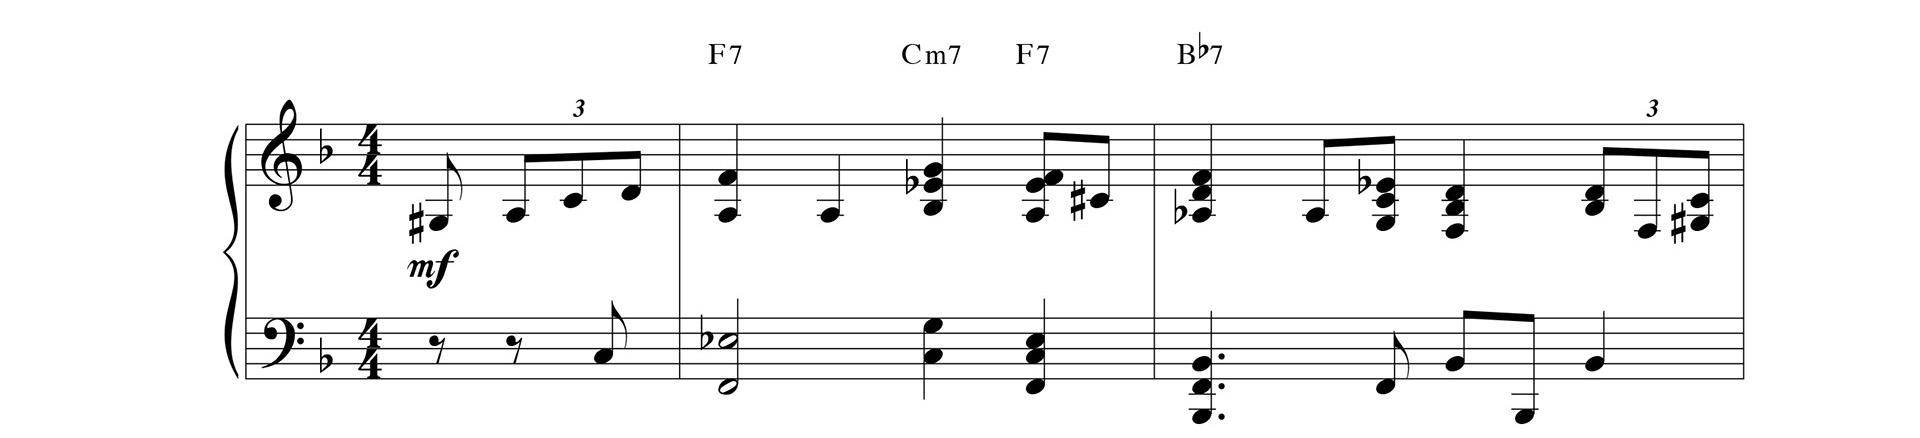 Passing Chord Into the IV Chord